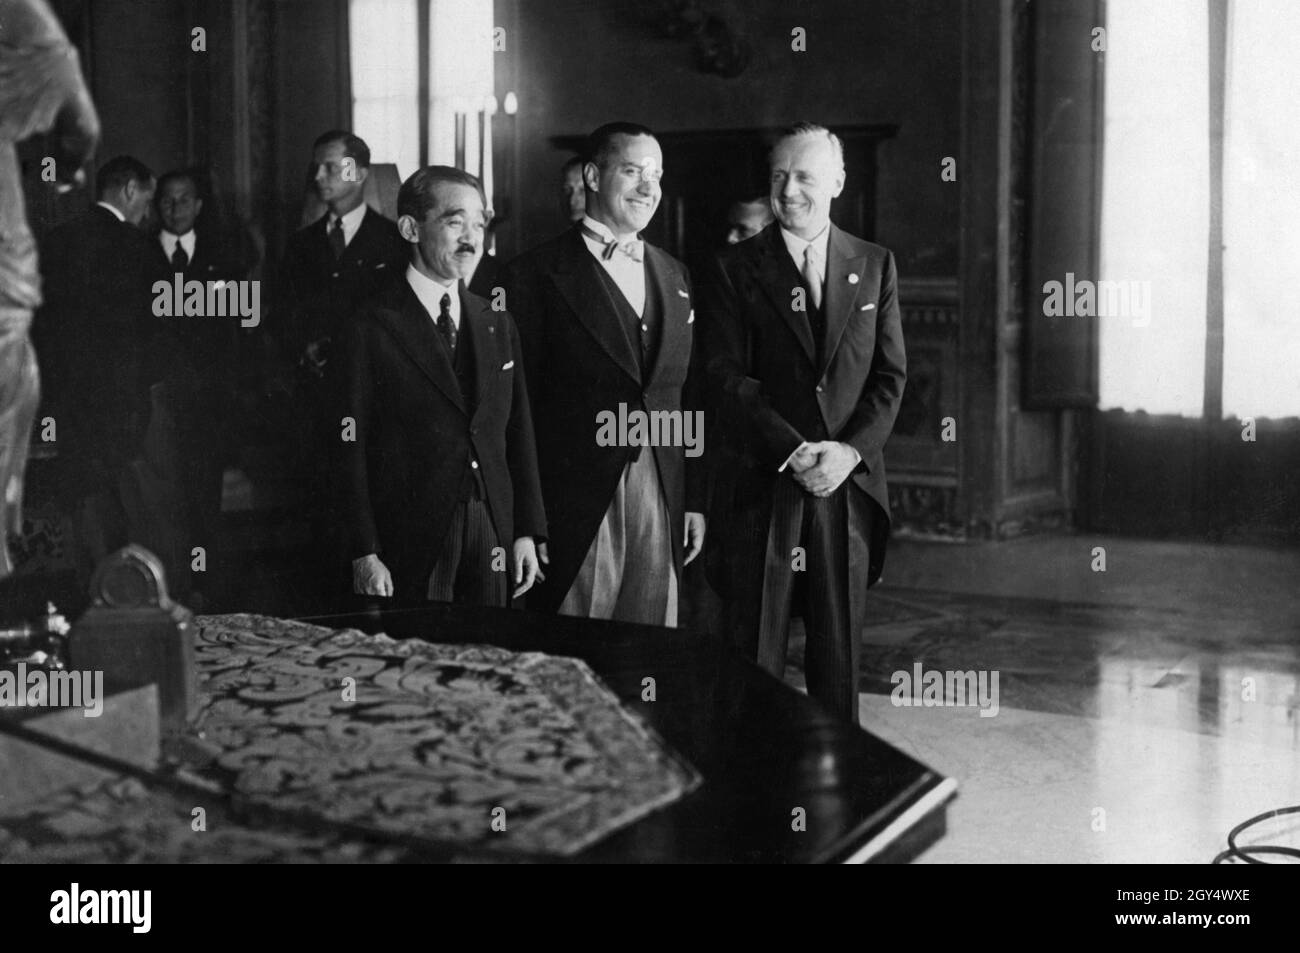 On November 6, 1937, Fascist Italy joined the Anti-Comintern Pact that Germany and Japan had signed the year before. On the morning of November 6, diplomats gathered for the signing of the accession in Palazzo Chigi (then the seat of the Italian Foreign Ministry) in the center of Rome (from left to right): Hotta Masaaki, Japan's ambassador to Italy, Count Gian Galeazzo Ciano, Italian foreign minister, and Joachim von Ribbentrop, then German ambassador in London, here in the capacity of ambassador extraordinary and plenipotentiary for Germany. [automated translation] Stock Photo